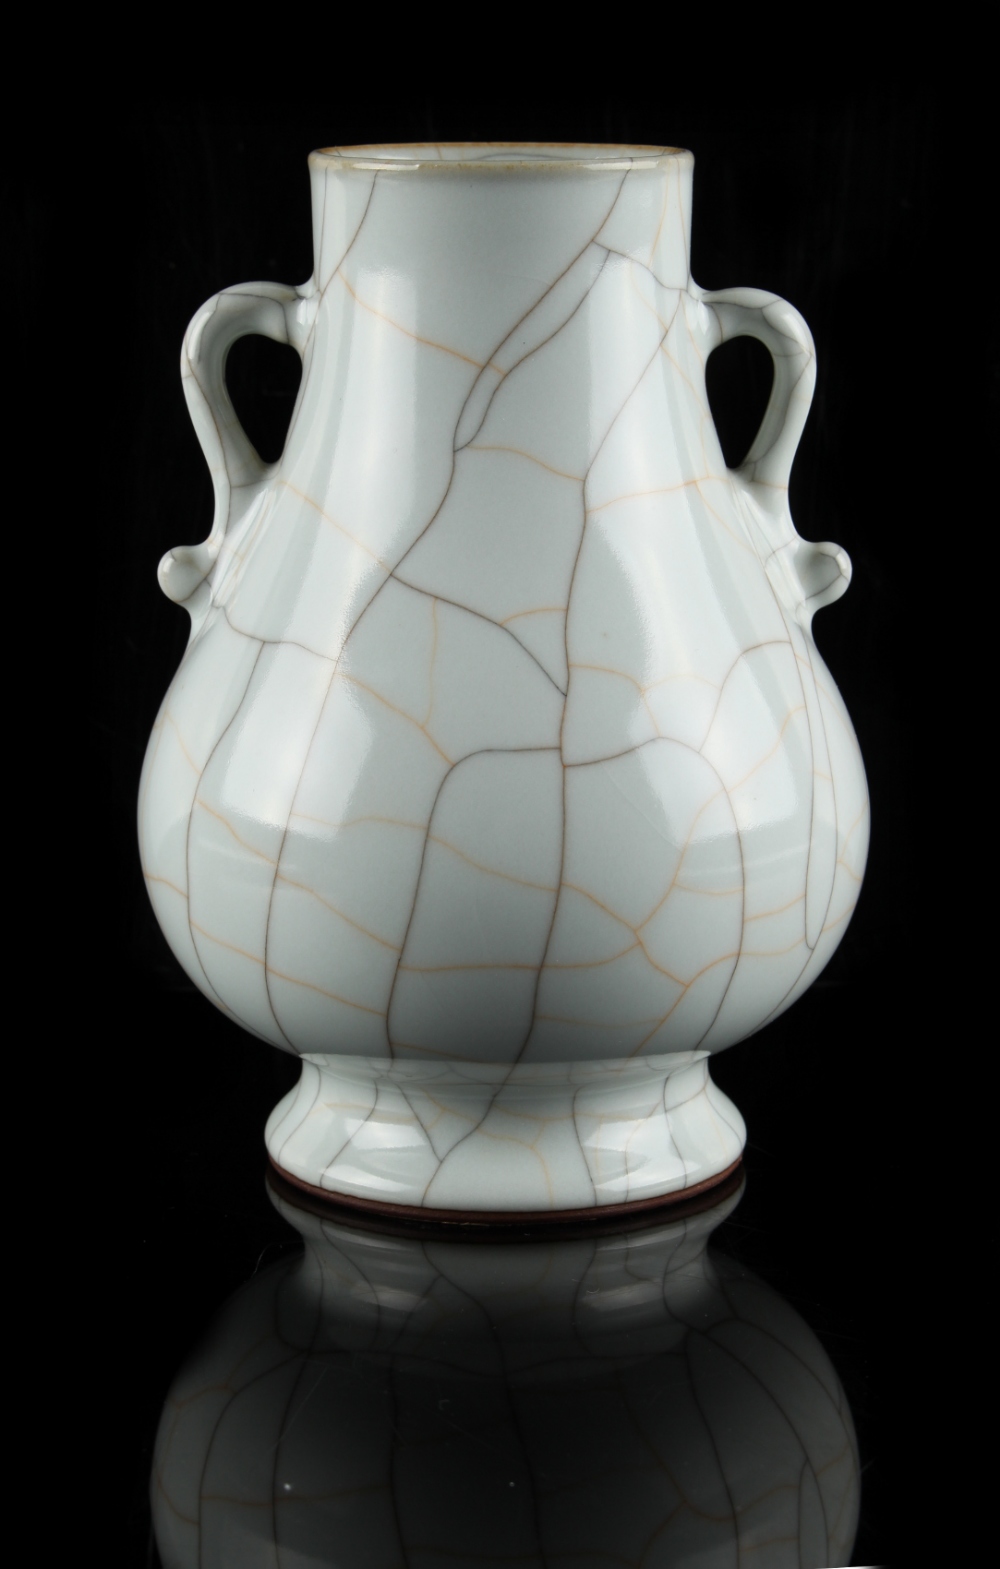 A Chinese guan type two-handled vase, hu, probably late 20th century, 7ins. (17.8cms.) high (see